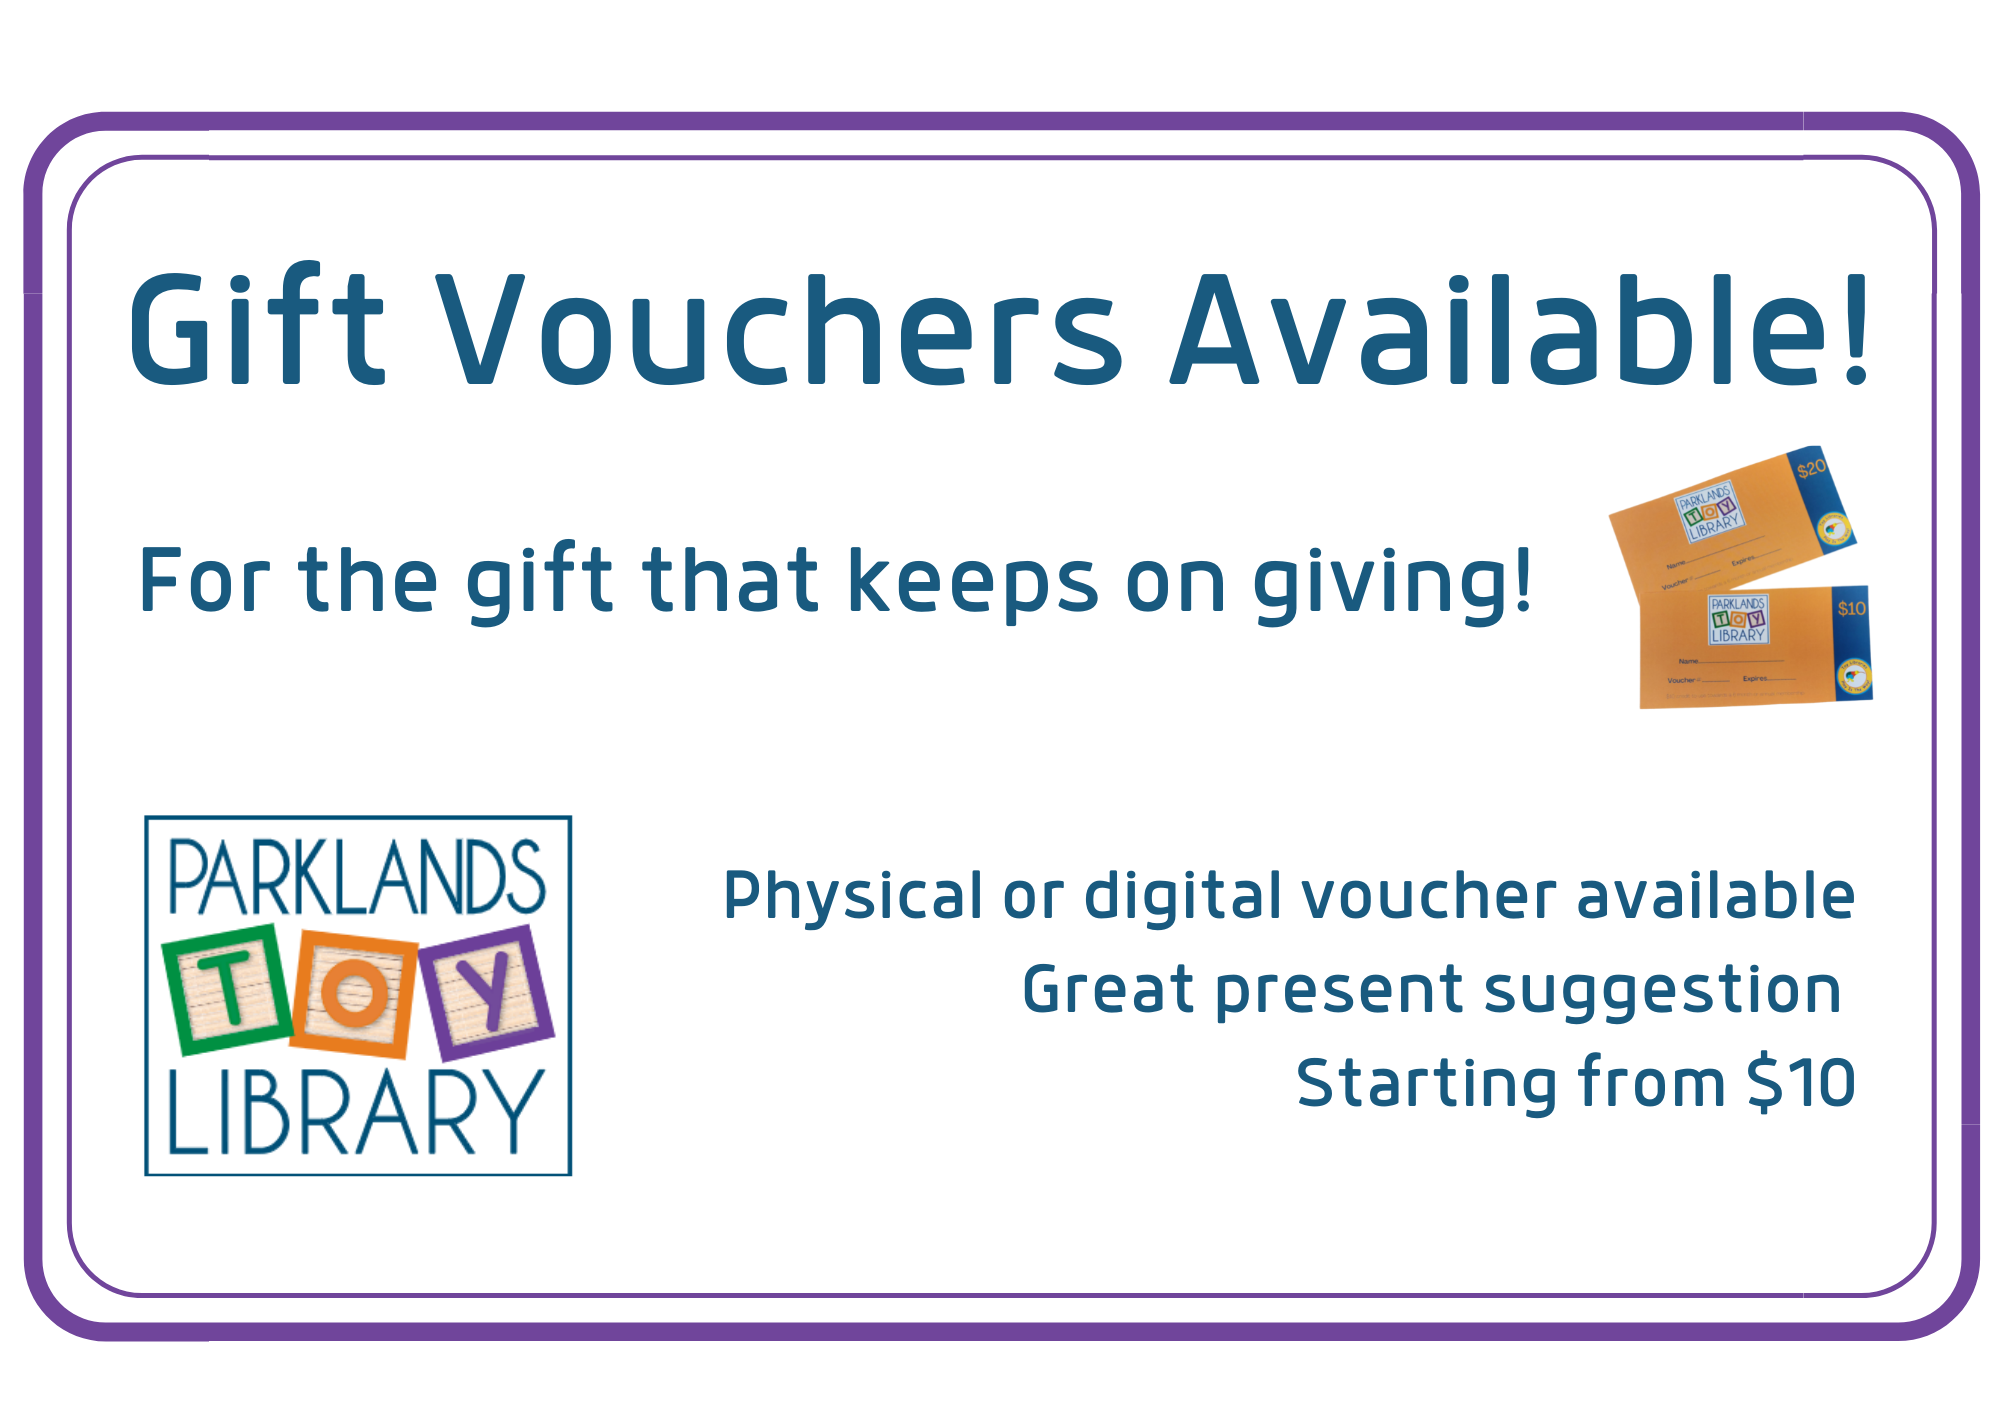 Gift Vouchers Available!